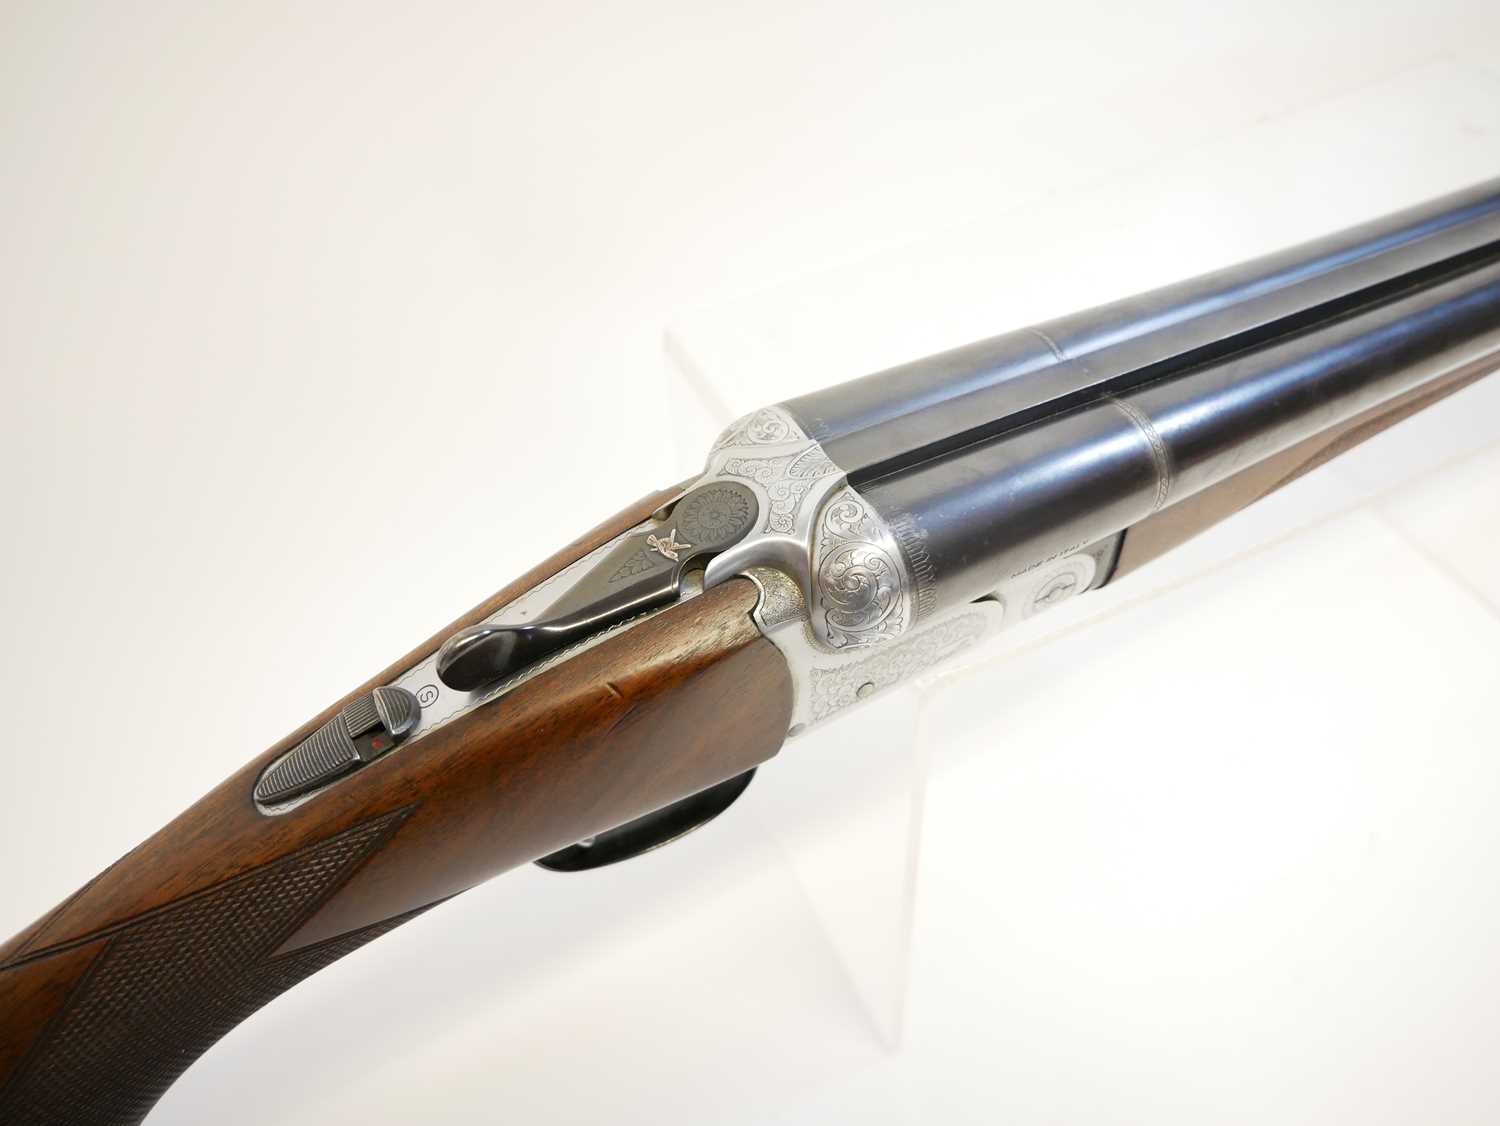 Beretta 12 bore side by side Model 626E shotgun, serial number A40366A, 28inch barrels with half and - Image 5 of 15